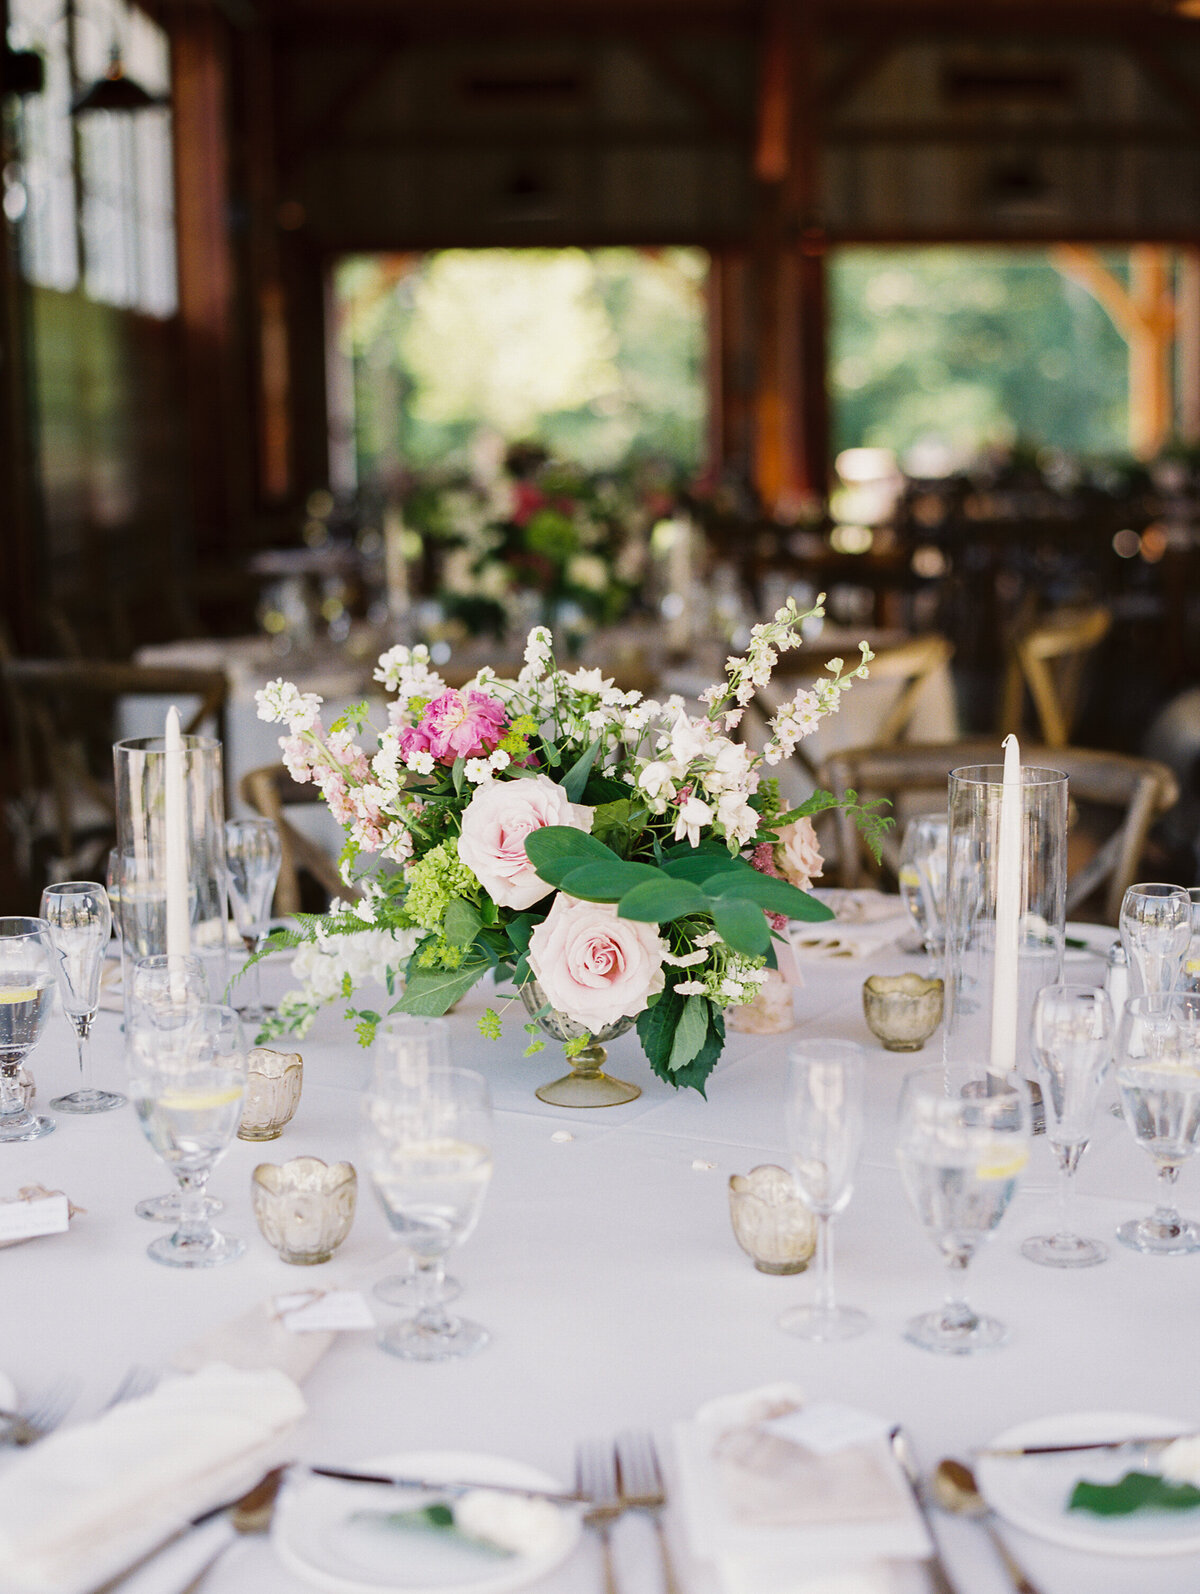 Floral centerpiece on a white tablecloth setting